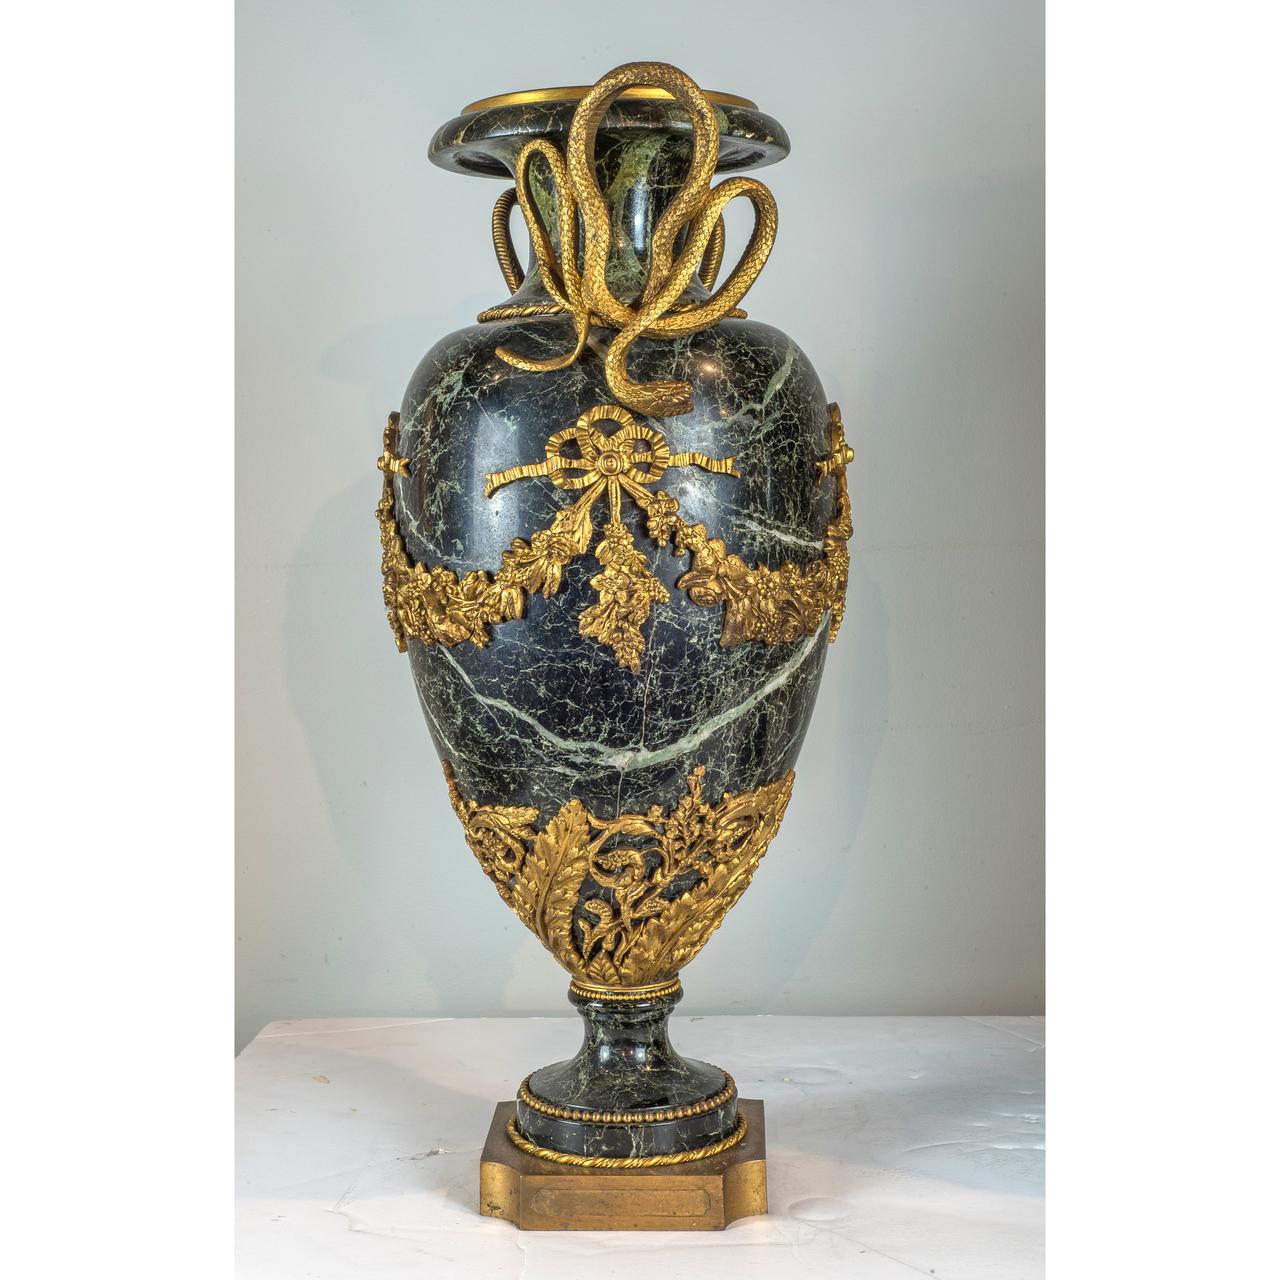 French A Grand Ormolu-Mounted Verde Antico Marble Urns with Serpent Handles For Sale